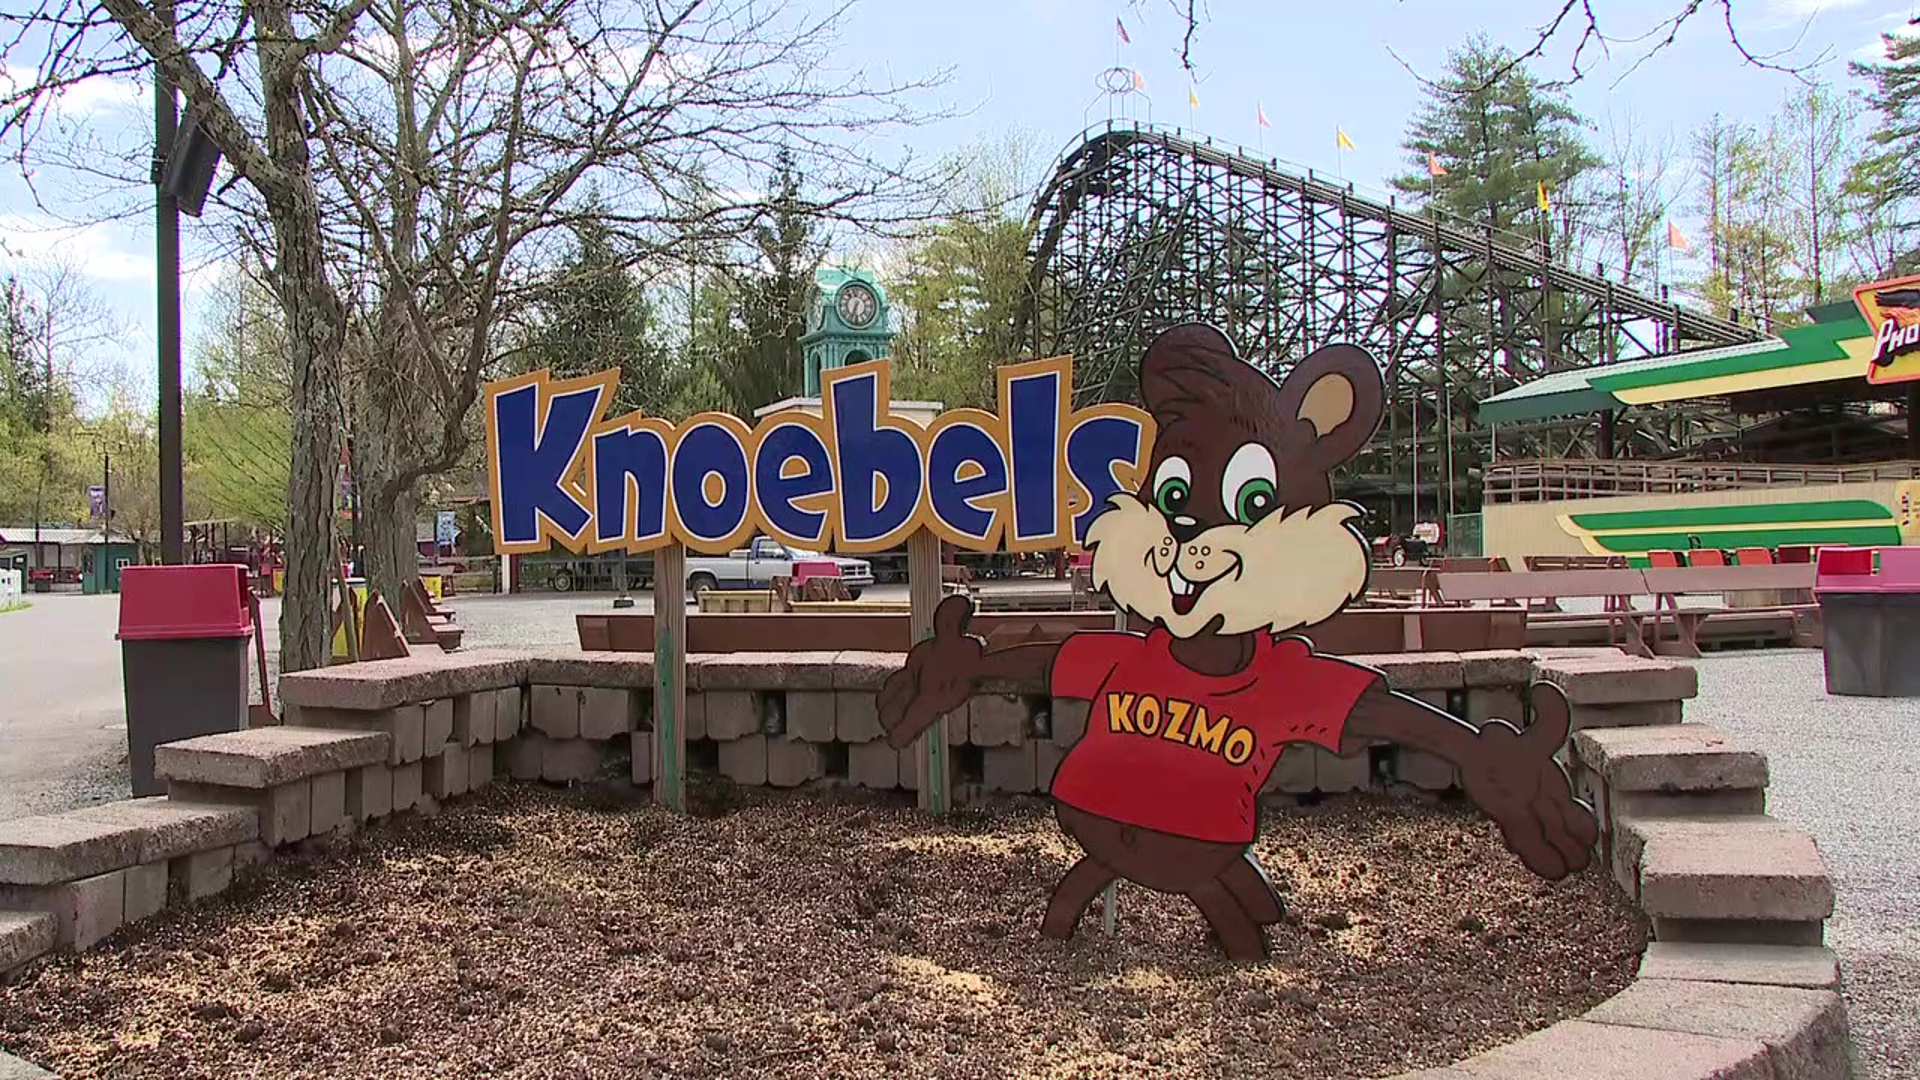 Less than 48 hours until the fun, food, and fantasy are back at Knoebels Amusement Resort.